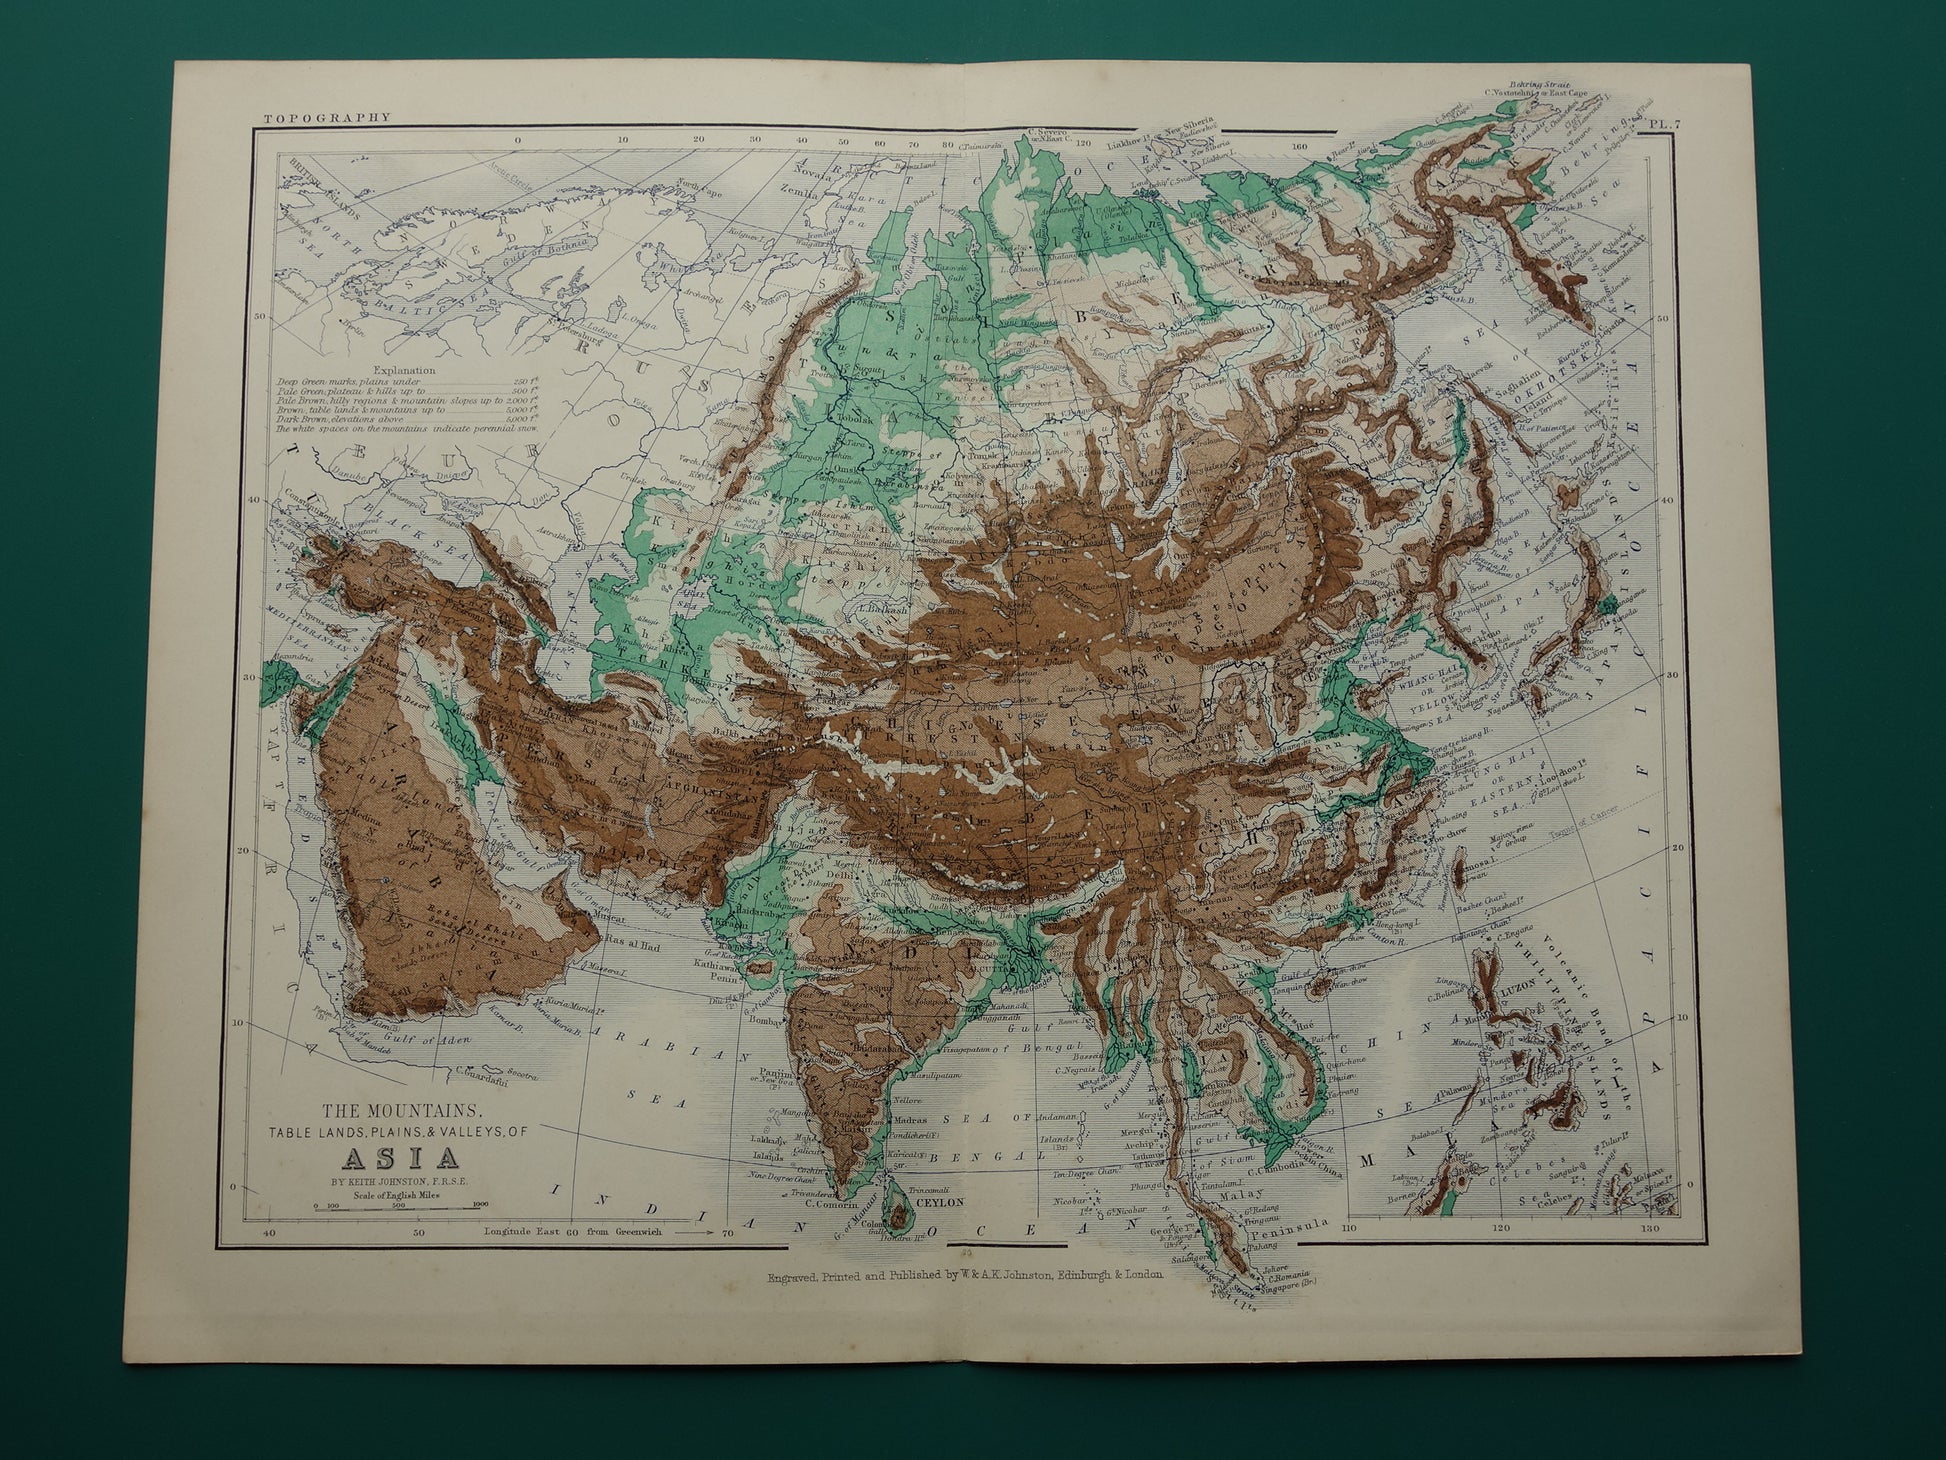 The mountains table lands plains and valleys of Asia by A.K. Johnston